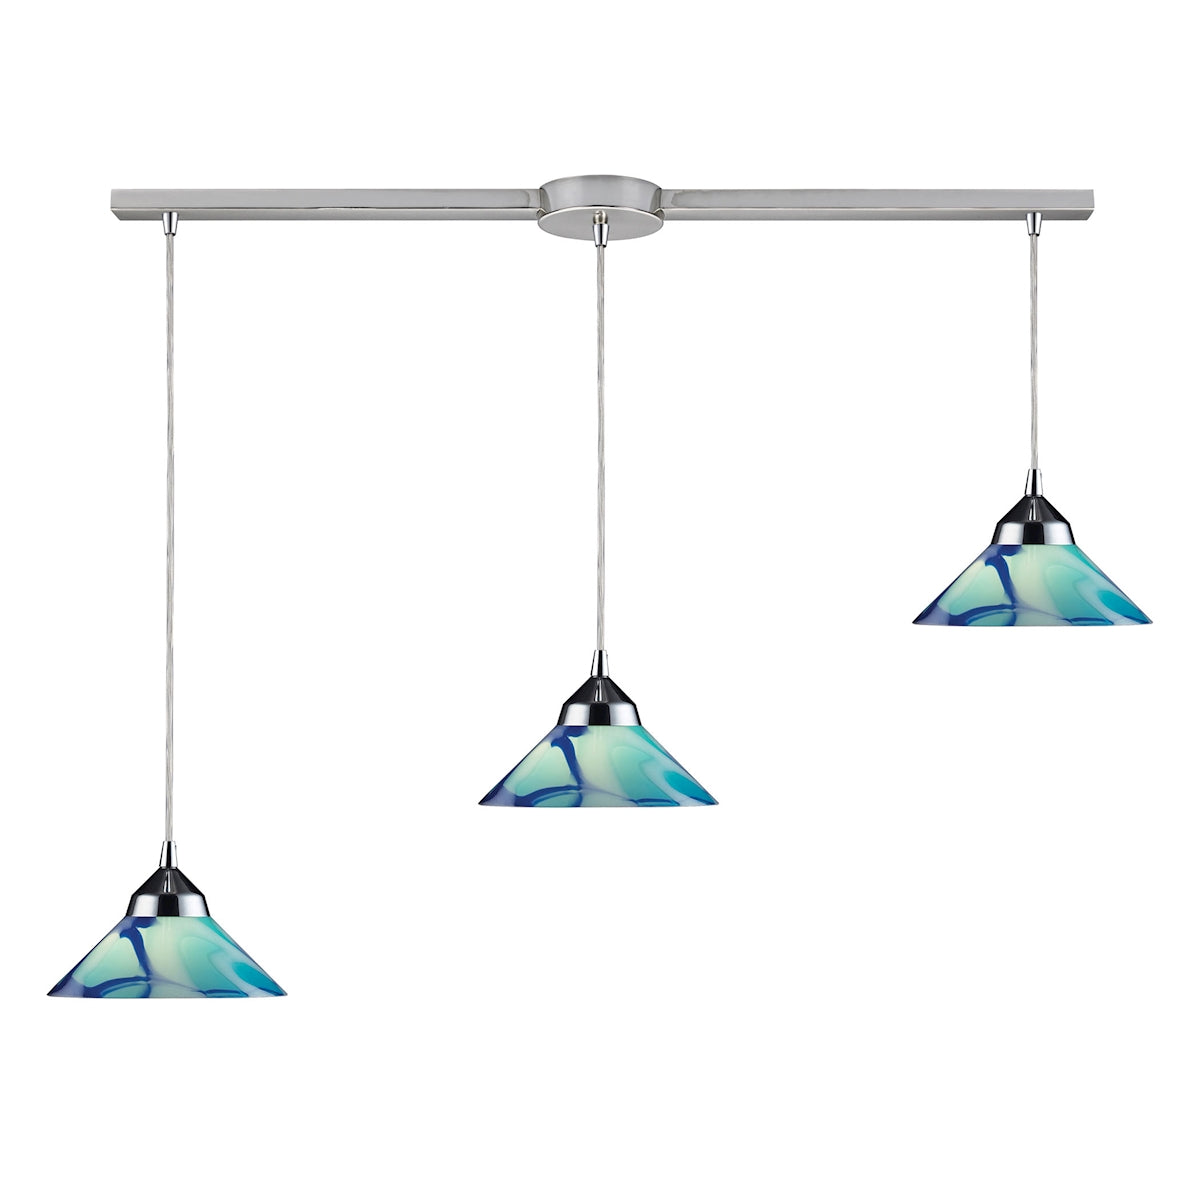 ELK Lighting 1477/3L-CAR Refraction 3-Light Linear Pendant Fixture in Polished Chrome with Satin Glass